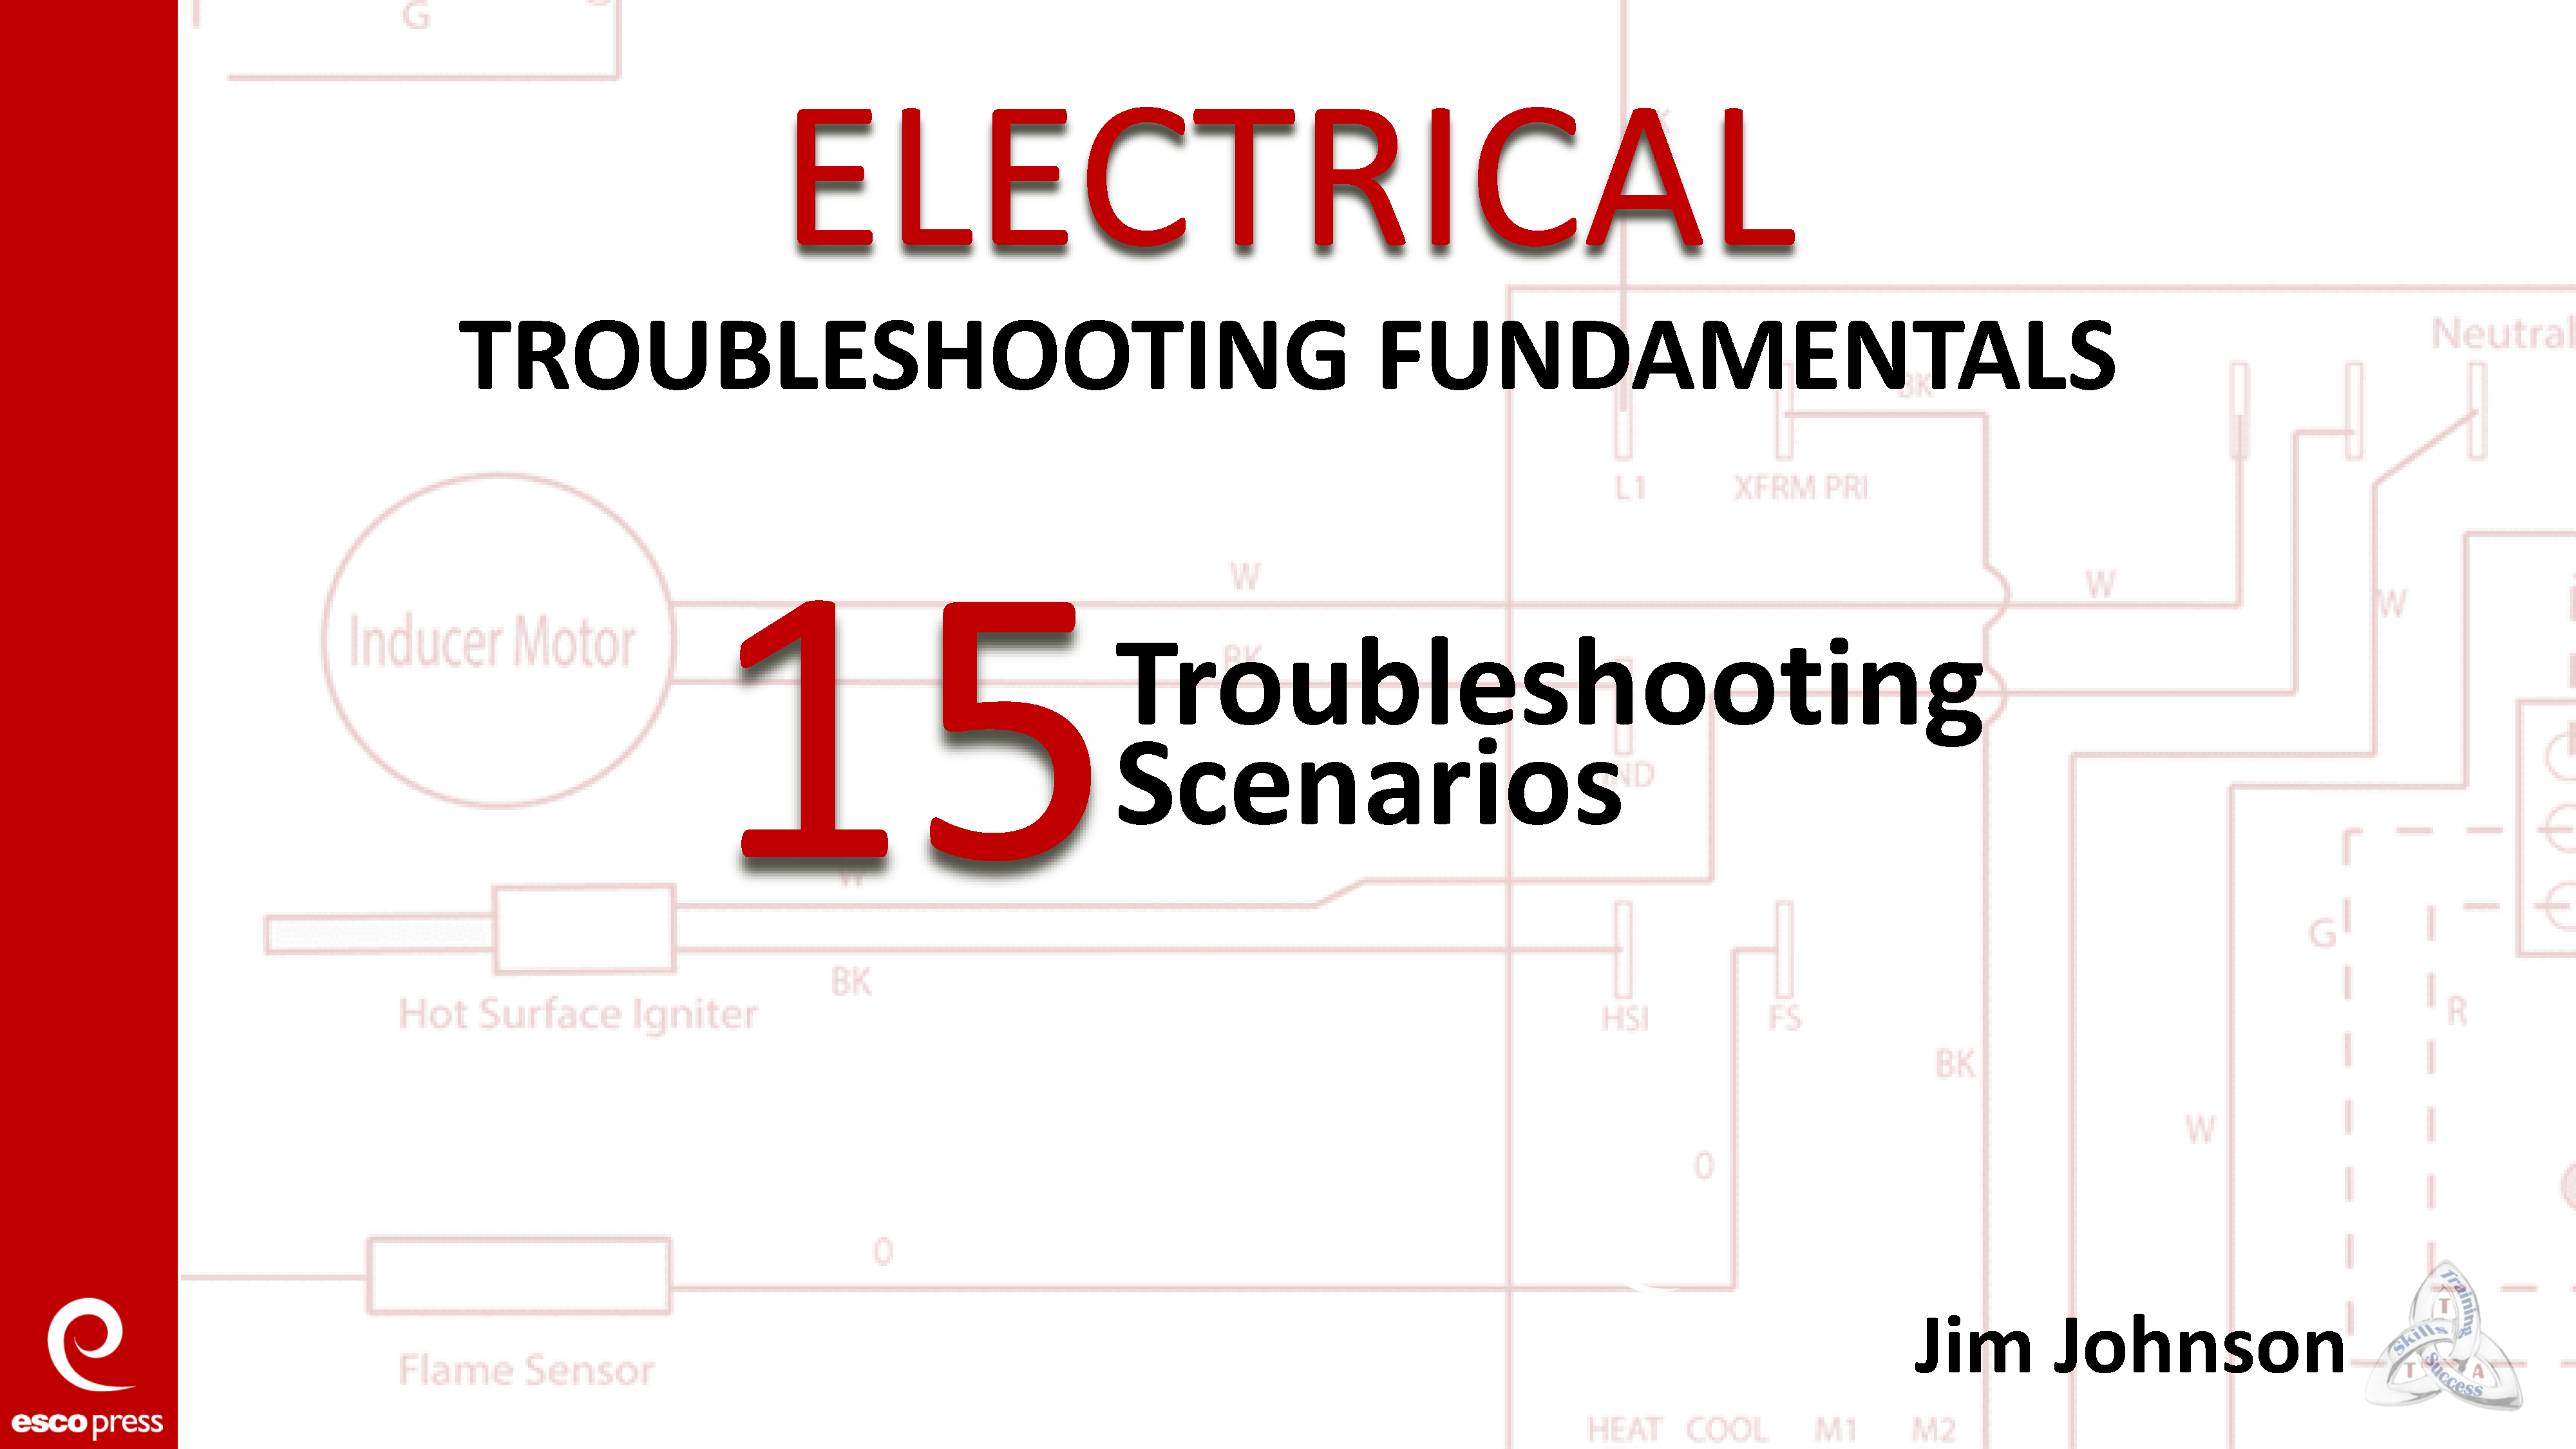 HVACR Troubleshooting Fundamentals: 15 Electrical Troubleshooting Scenarios PowerPoint